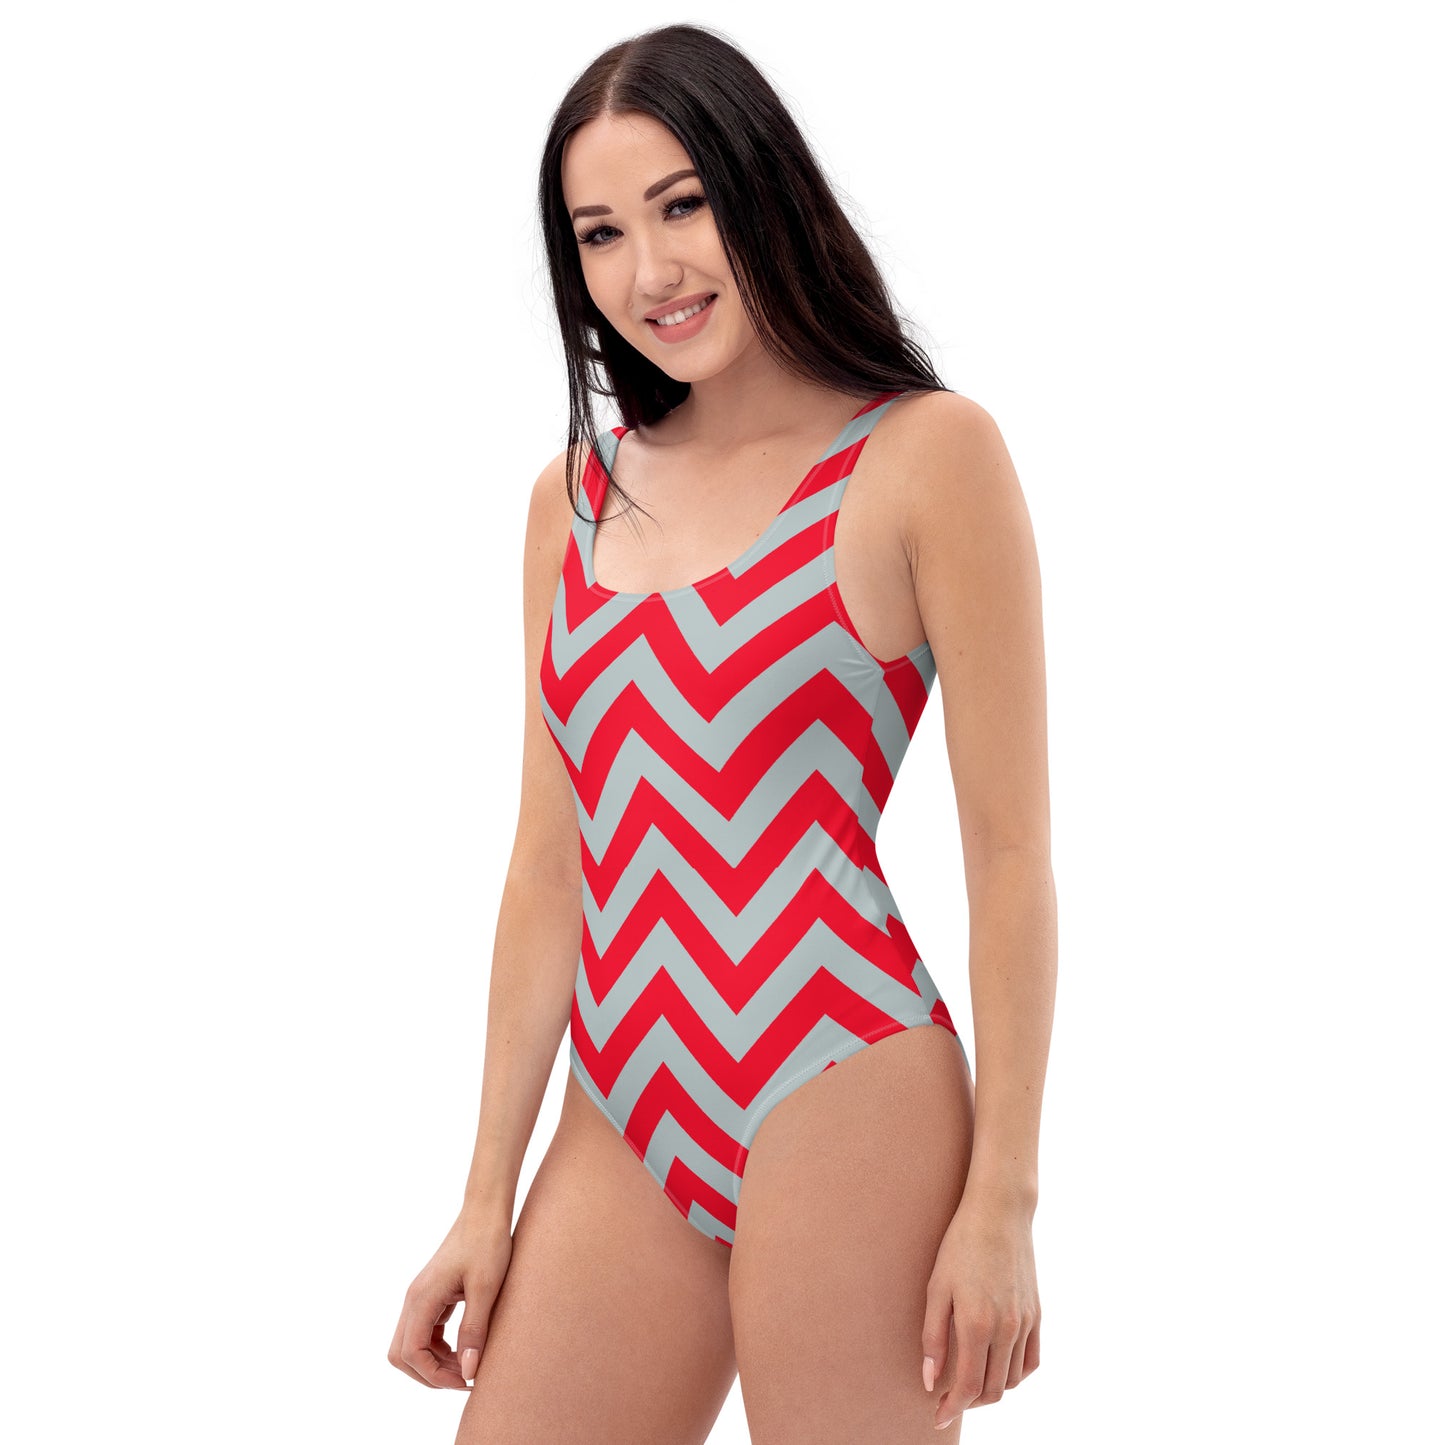 Zigzag - Inspired By Harry Styles - Sustainably Made One-Piece Swimsuit